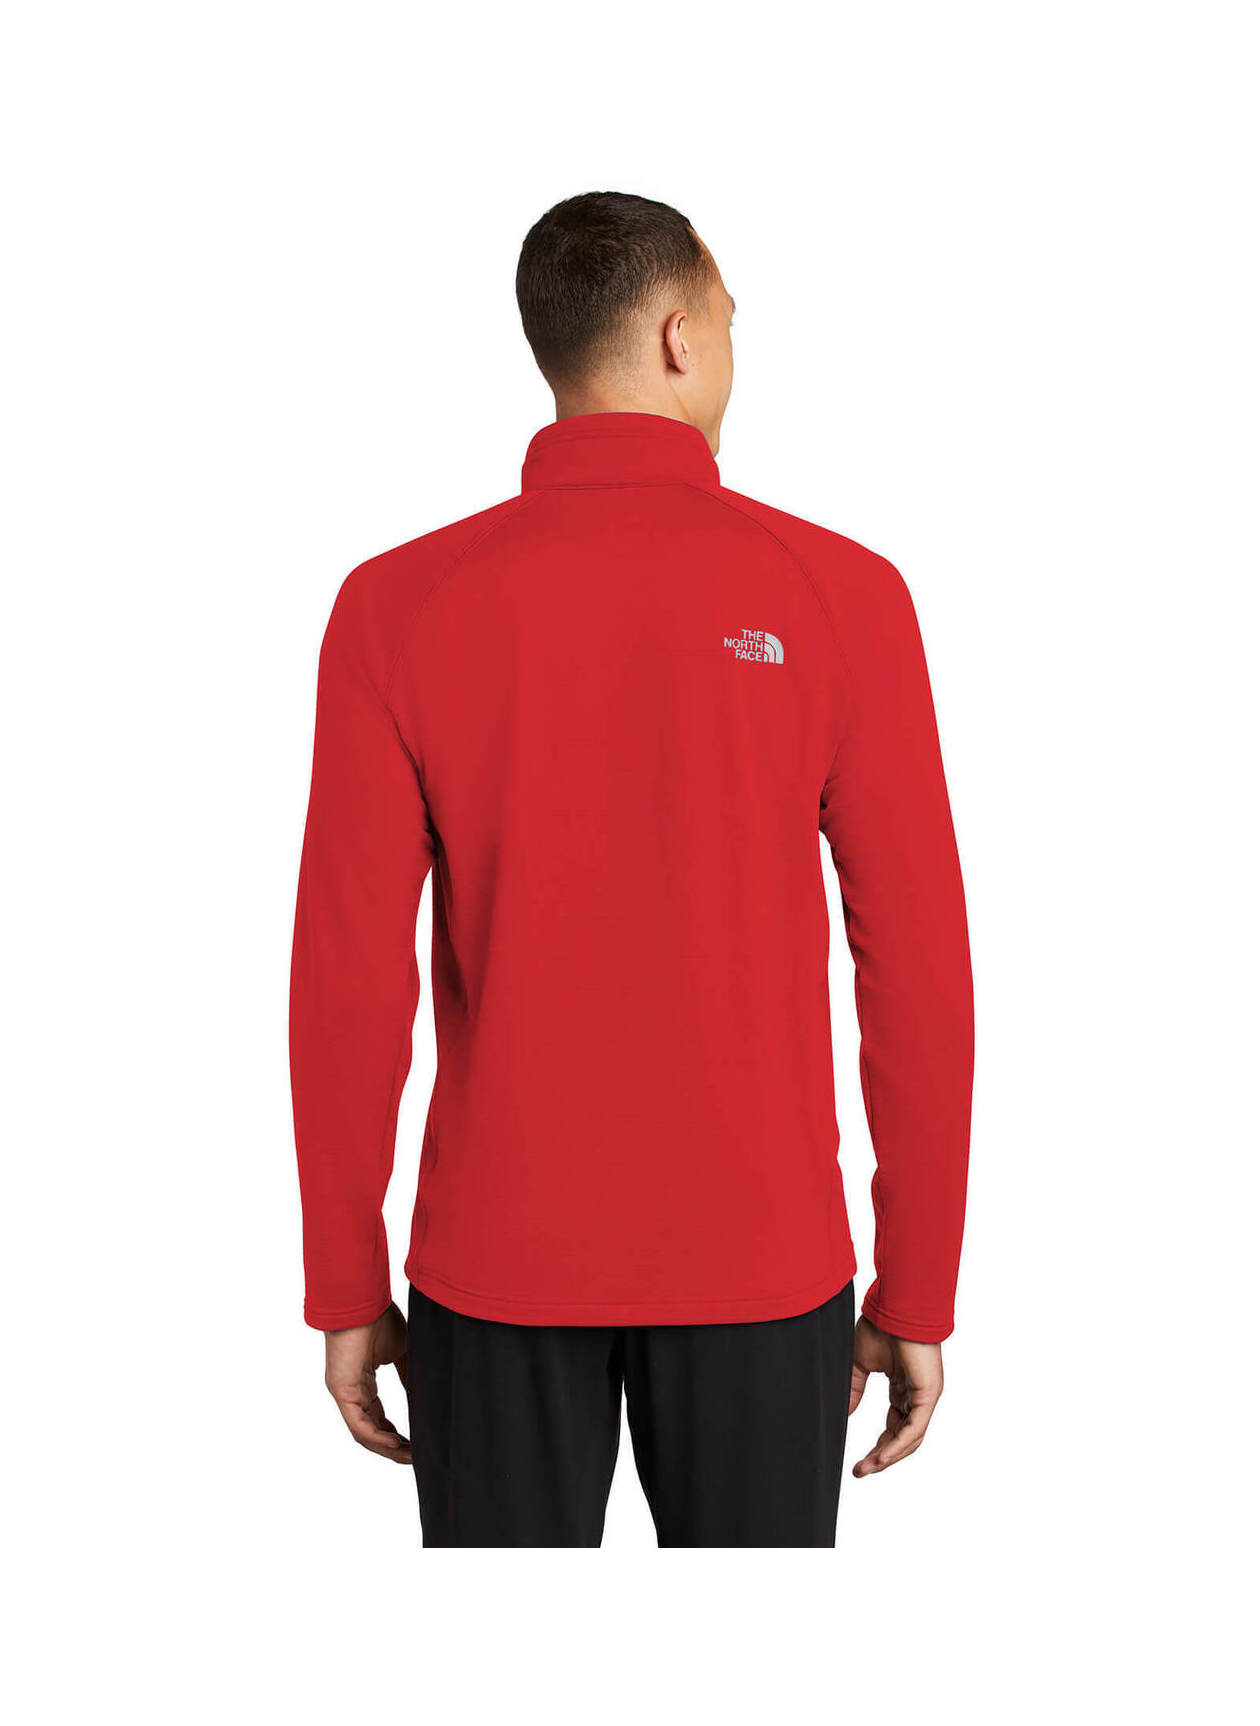 North Face Mountain Peaks Jacket (Men's) – Whiteboard Federal Swag Shop